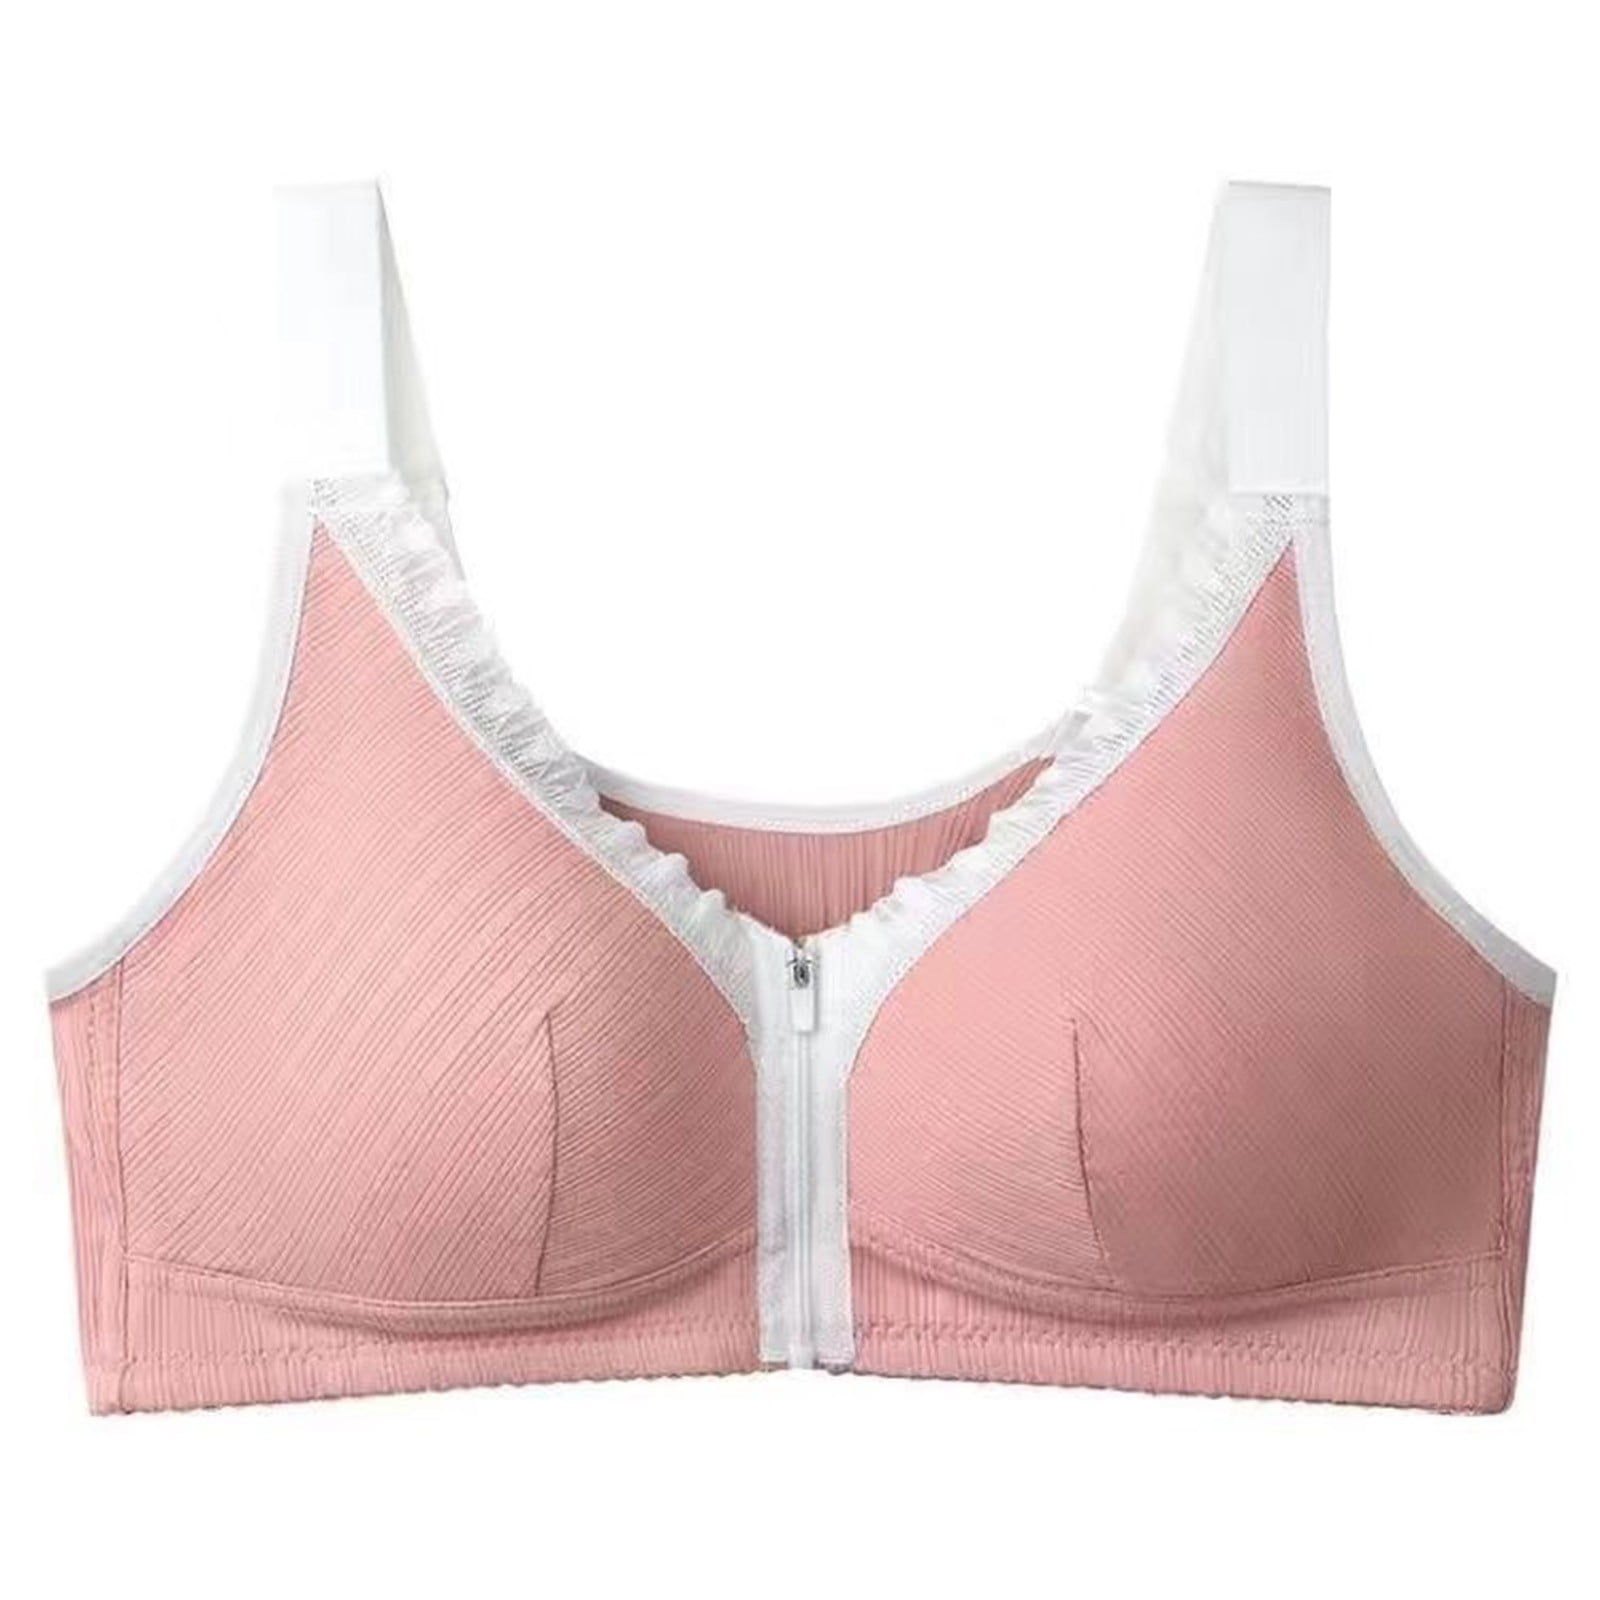 QUYUON Seamless Bras Large And Thin Women's Underwear Without Underwire,Gathered  And Breathable Active Fit Unlined Demi Bra Pink 4XL 